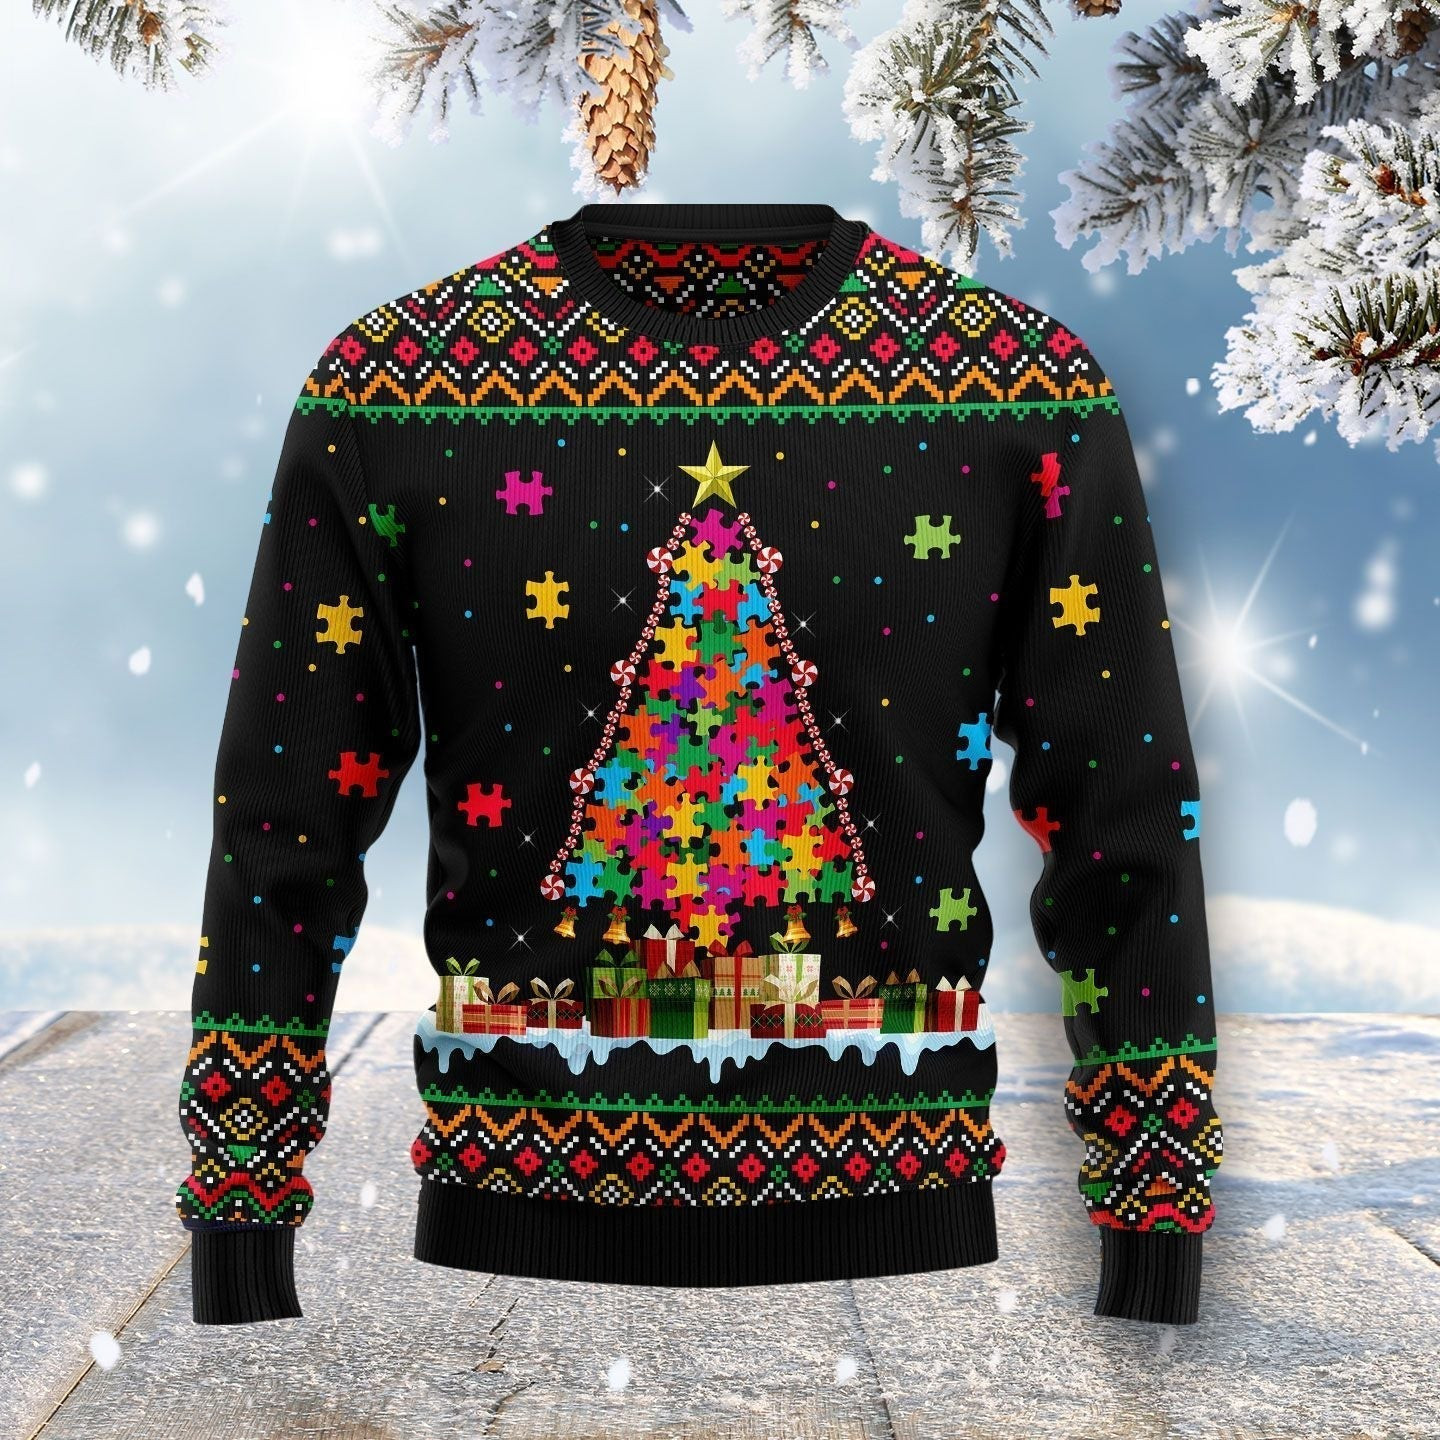 Autism Ugly Christmas Sweater, Ugly Sweater For Men Women, Holiday Sweater